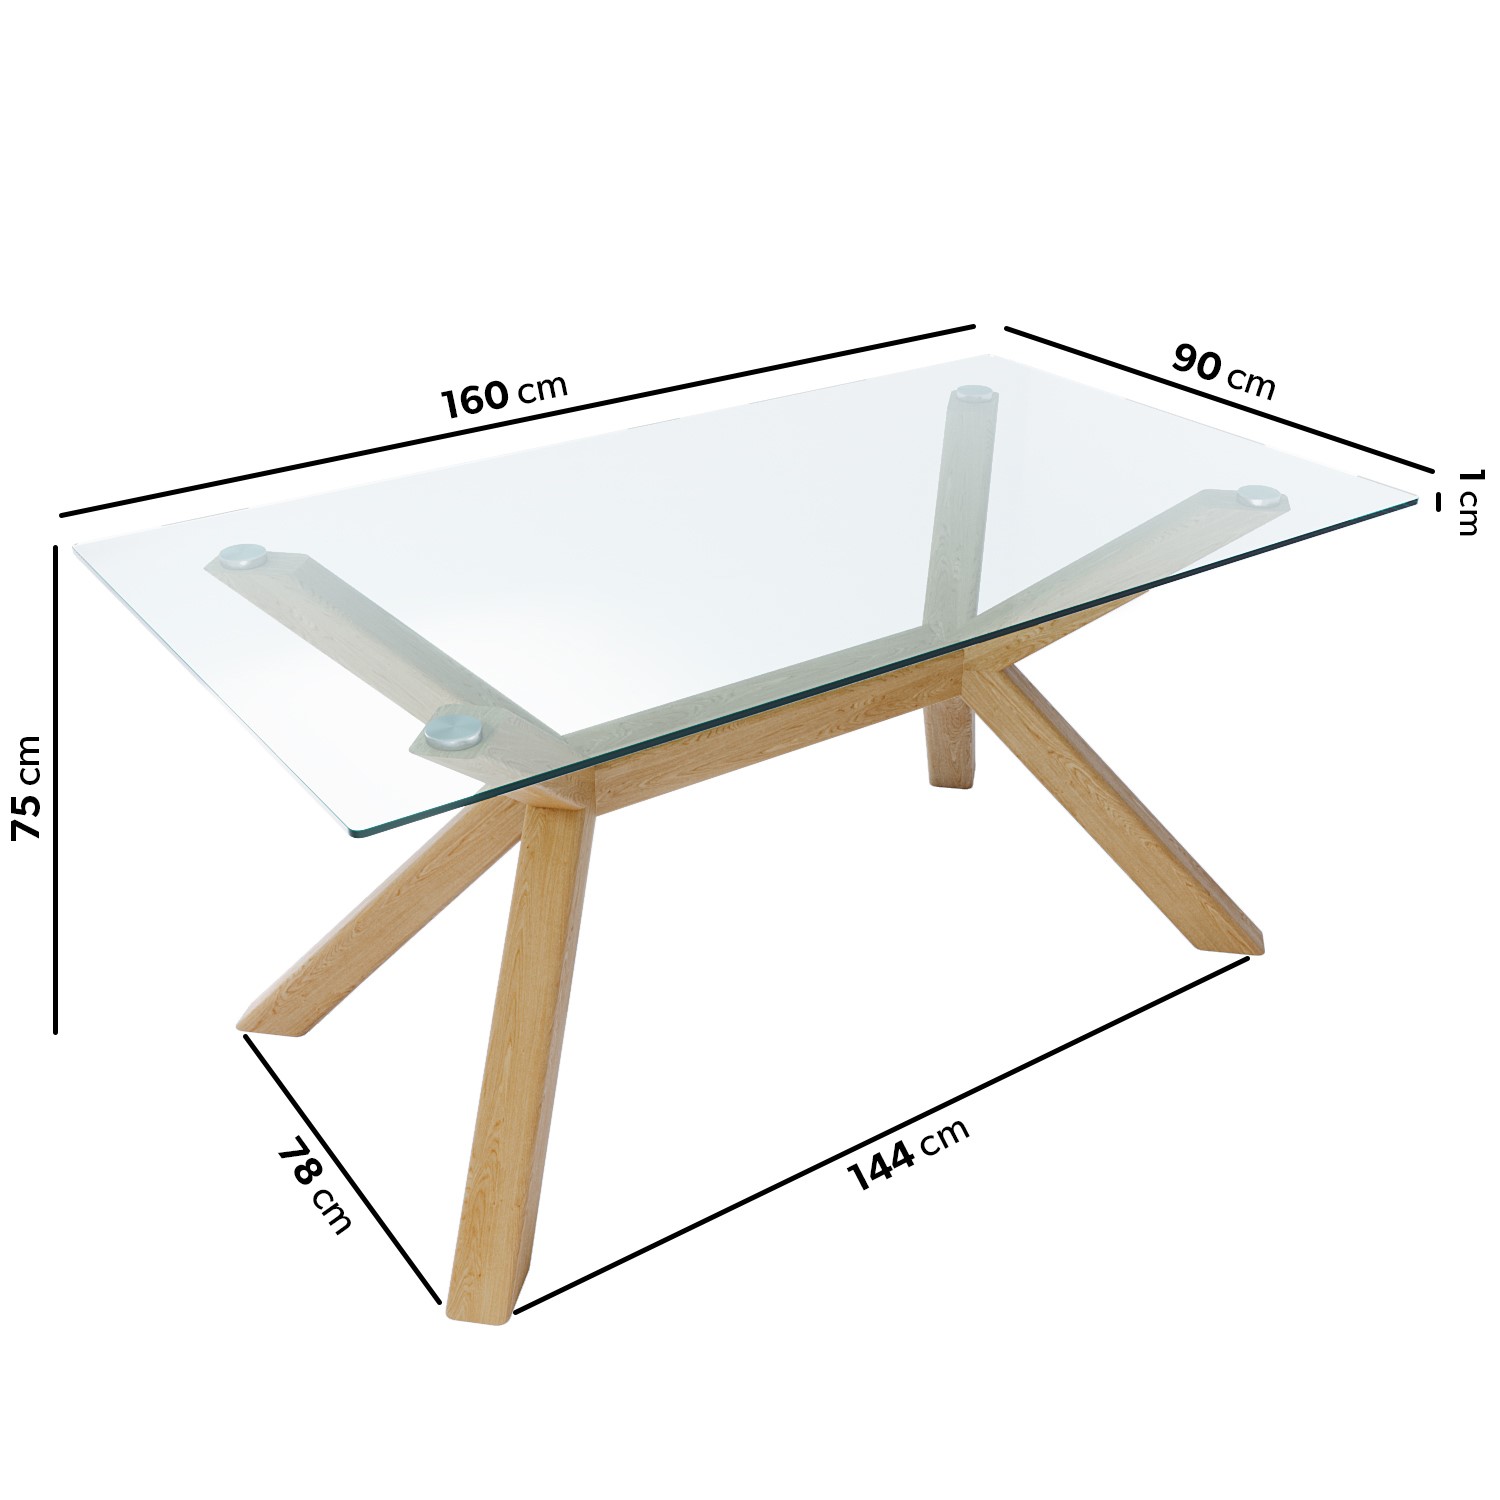 Read more about Large rectangle glass top dining table with solid oak legs nori